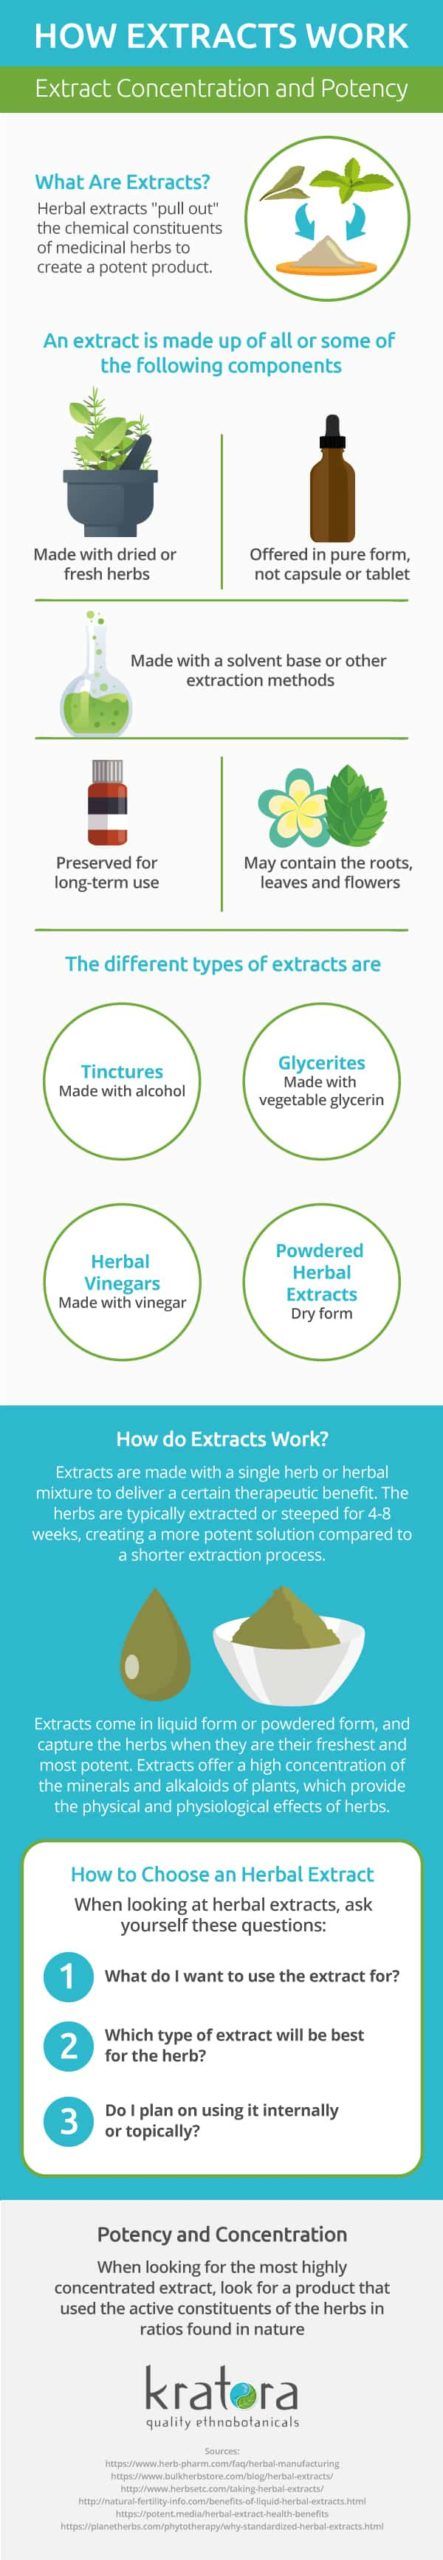 How Extracts Work Infographic